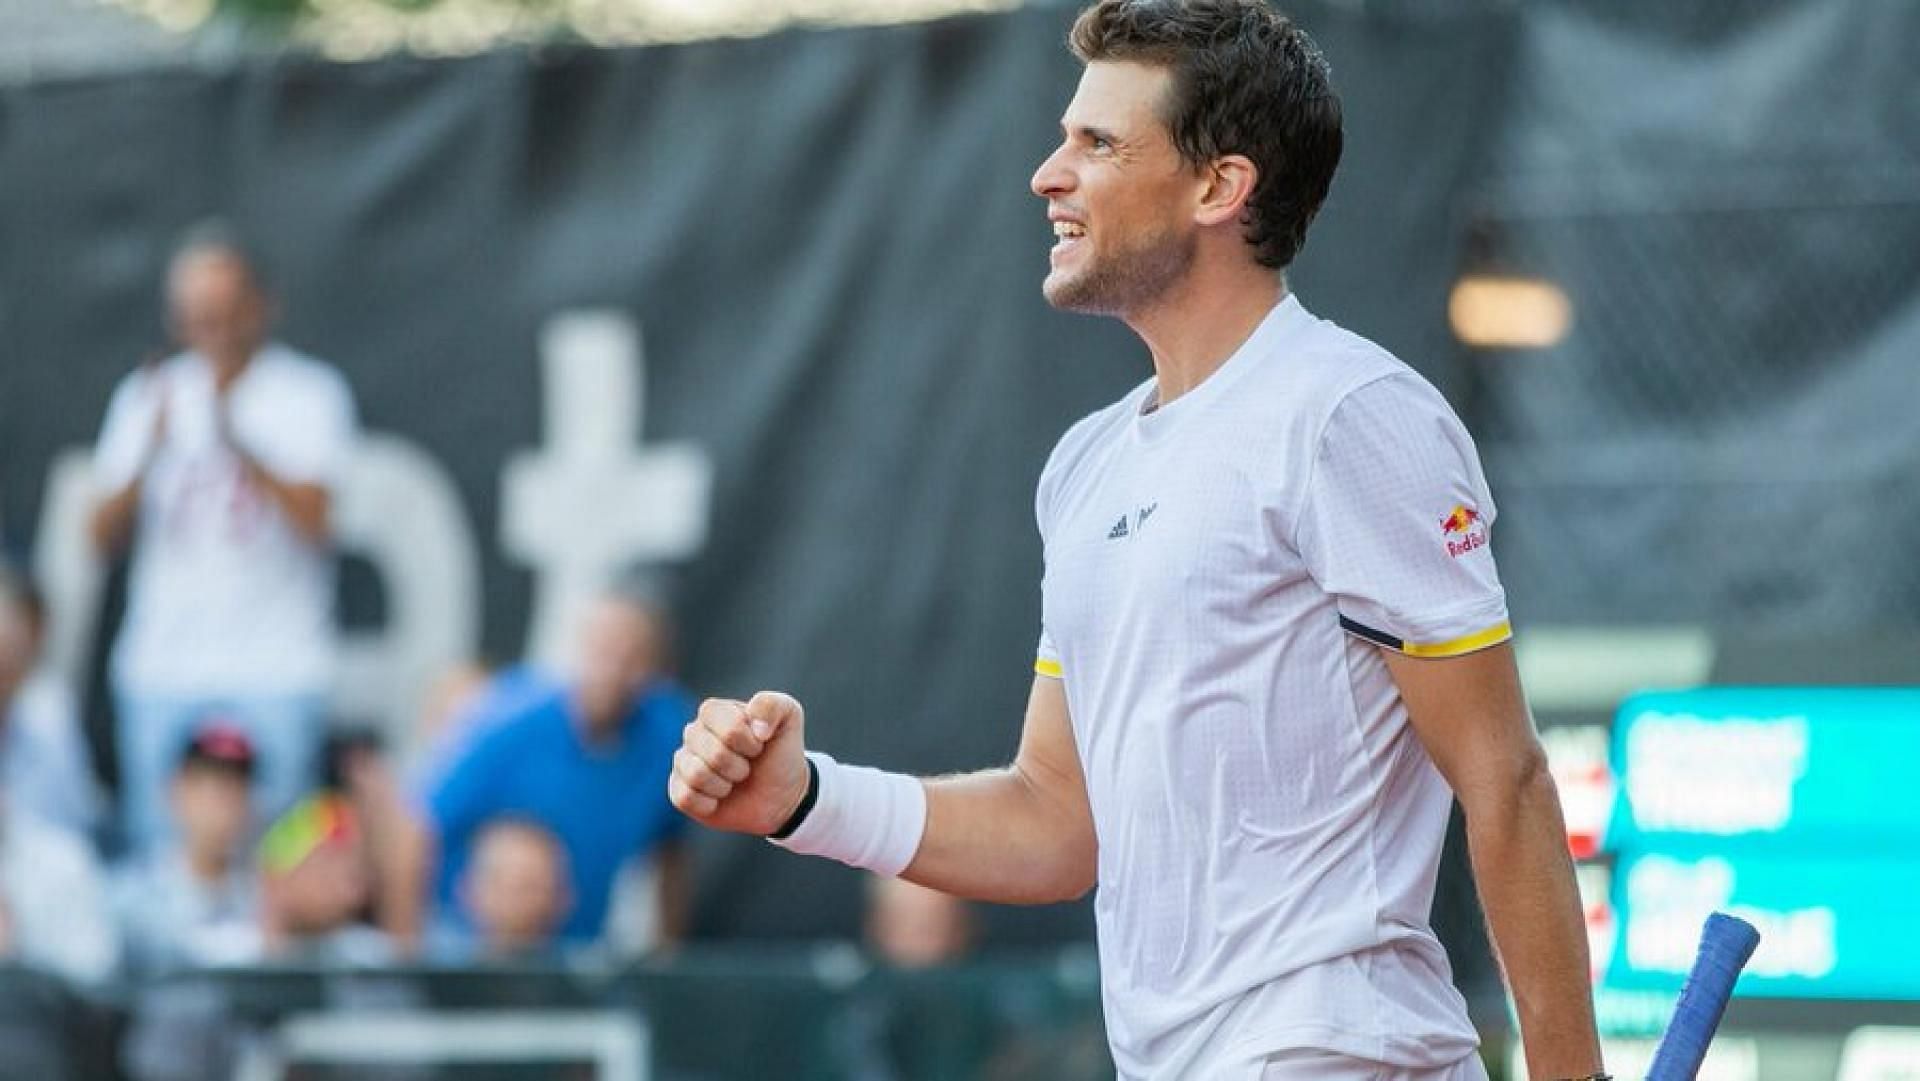 Dominic Thiem appears to be getting back to his old self